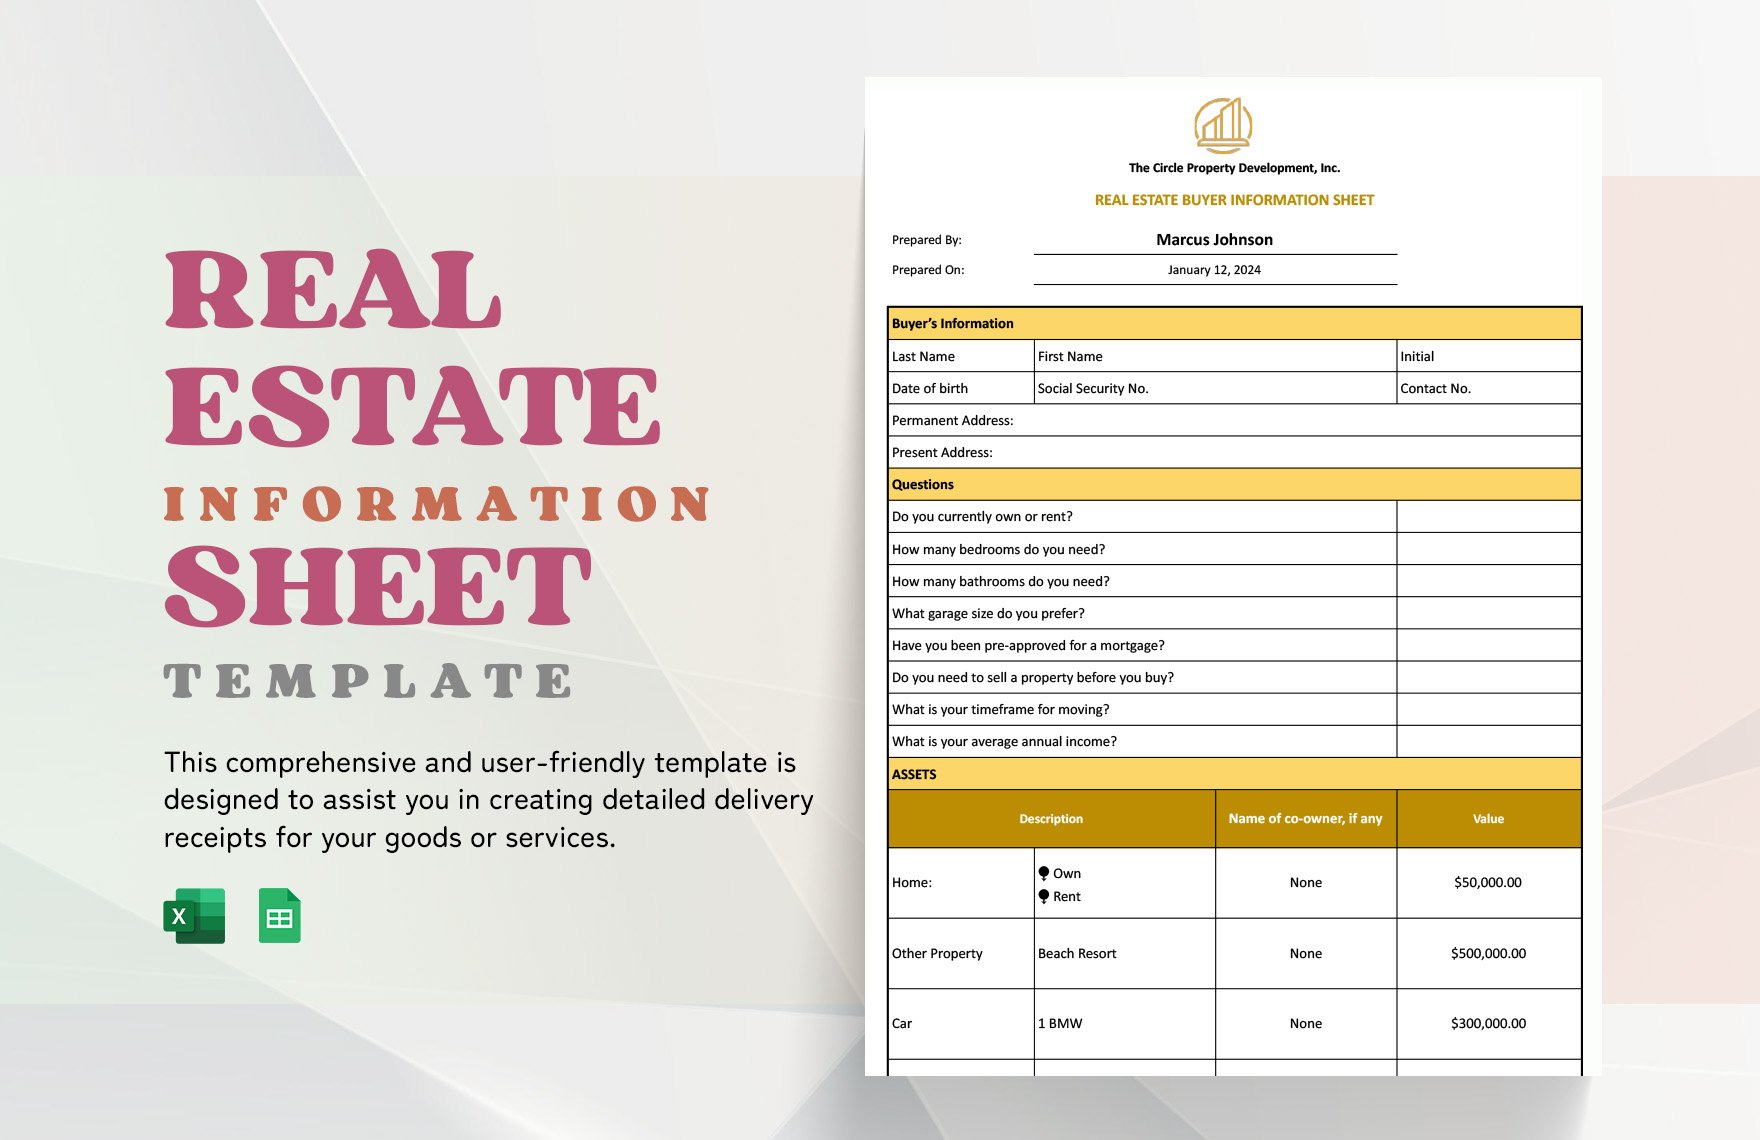 Real Estate Buyer Information Sheet Template in Word, Google Docs, Excel, Google Sheets, Apple Numbers